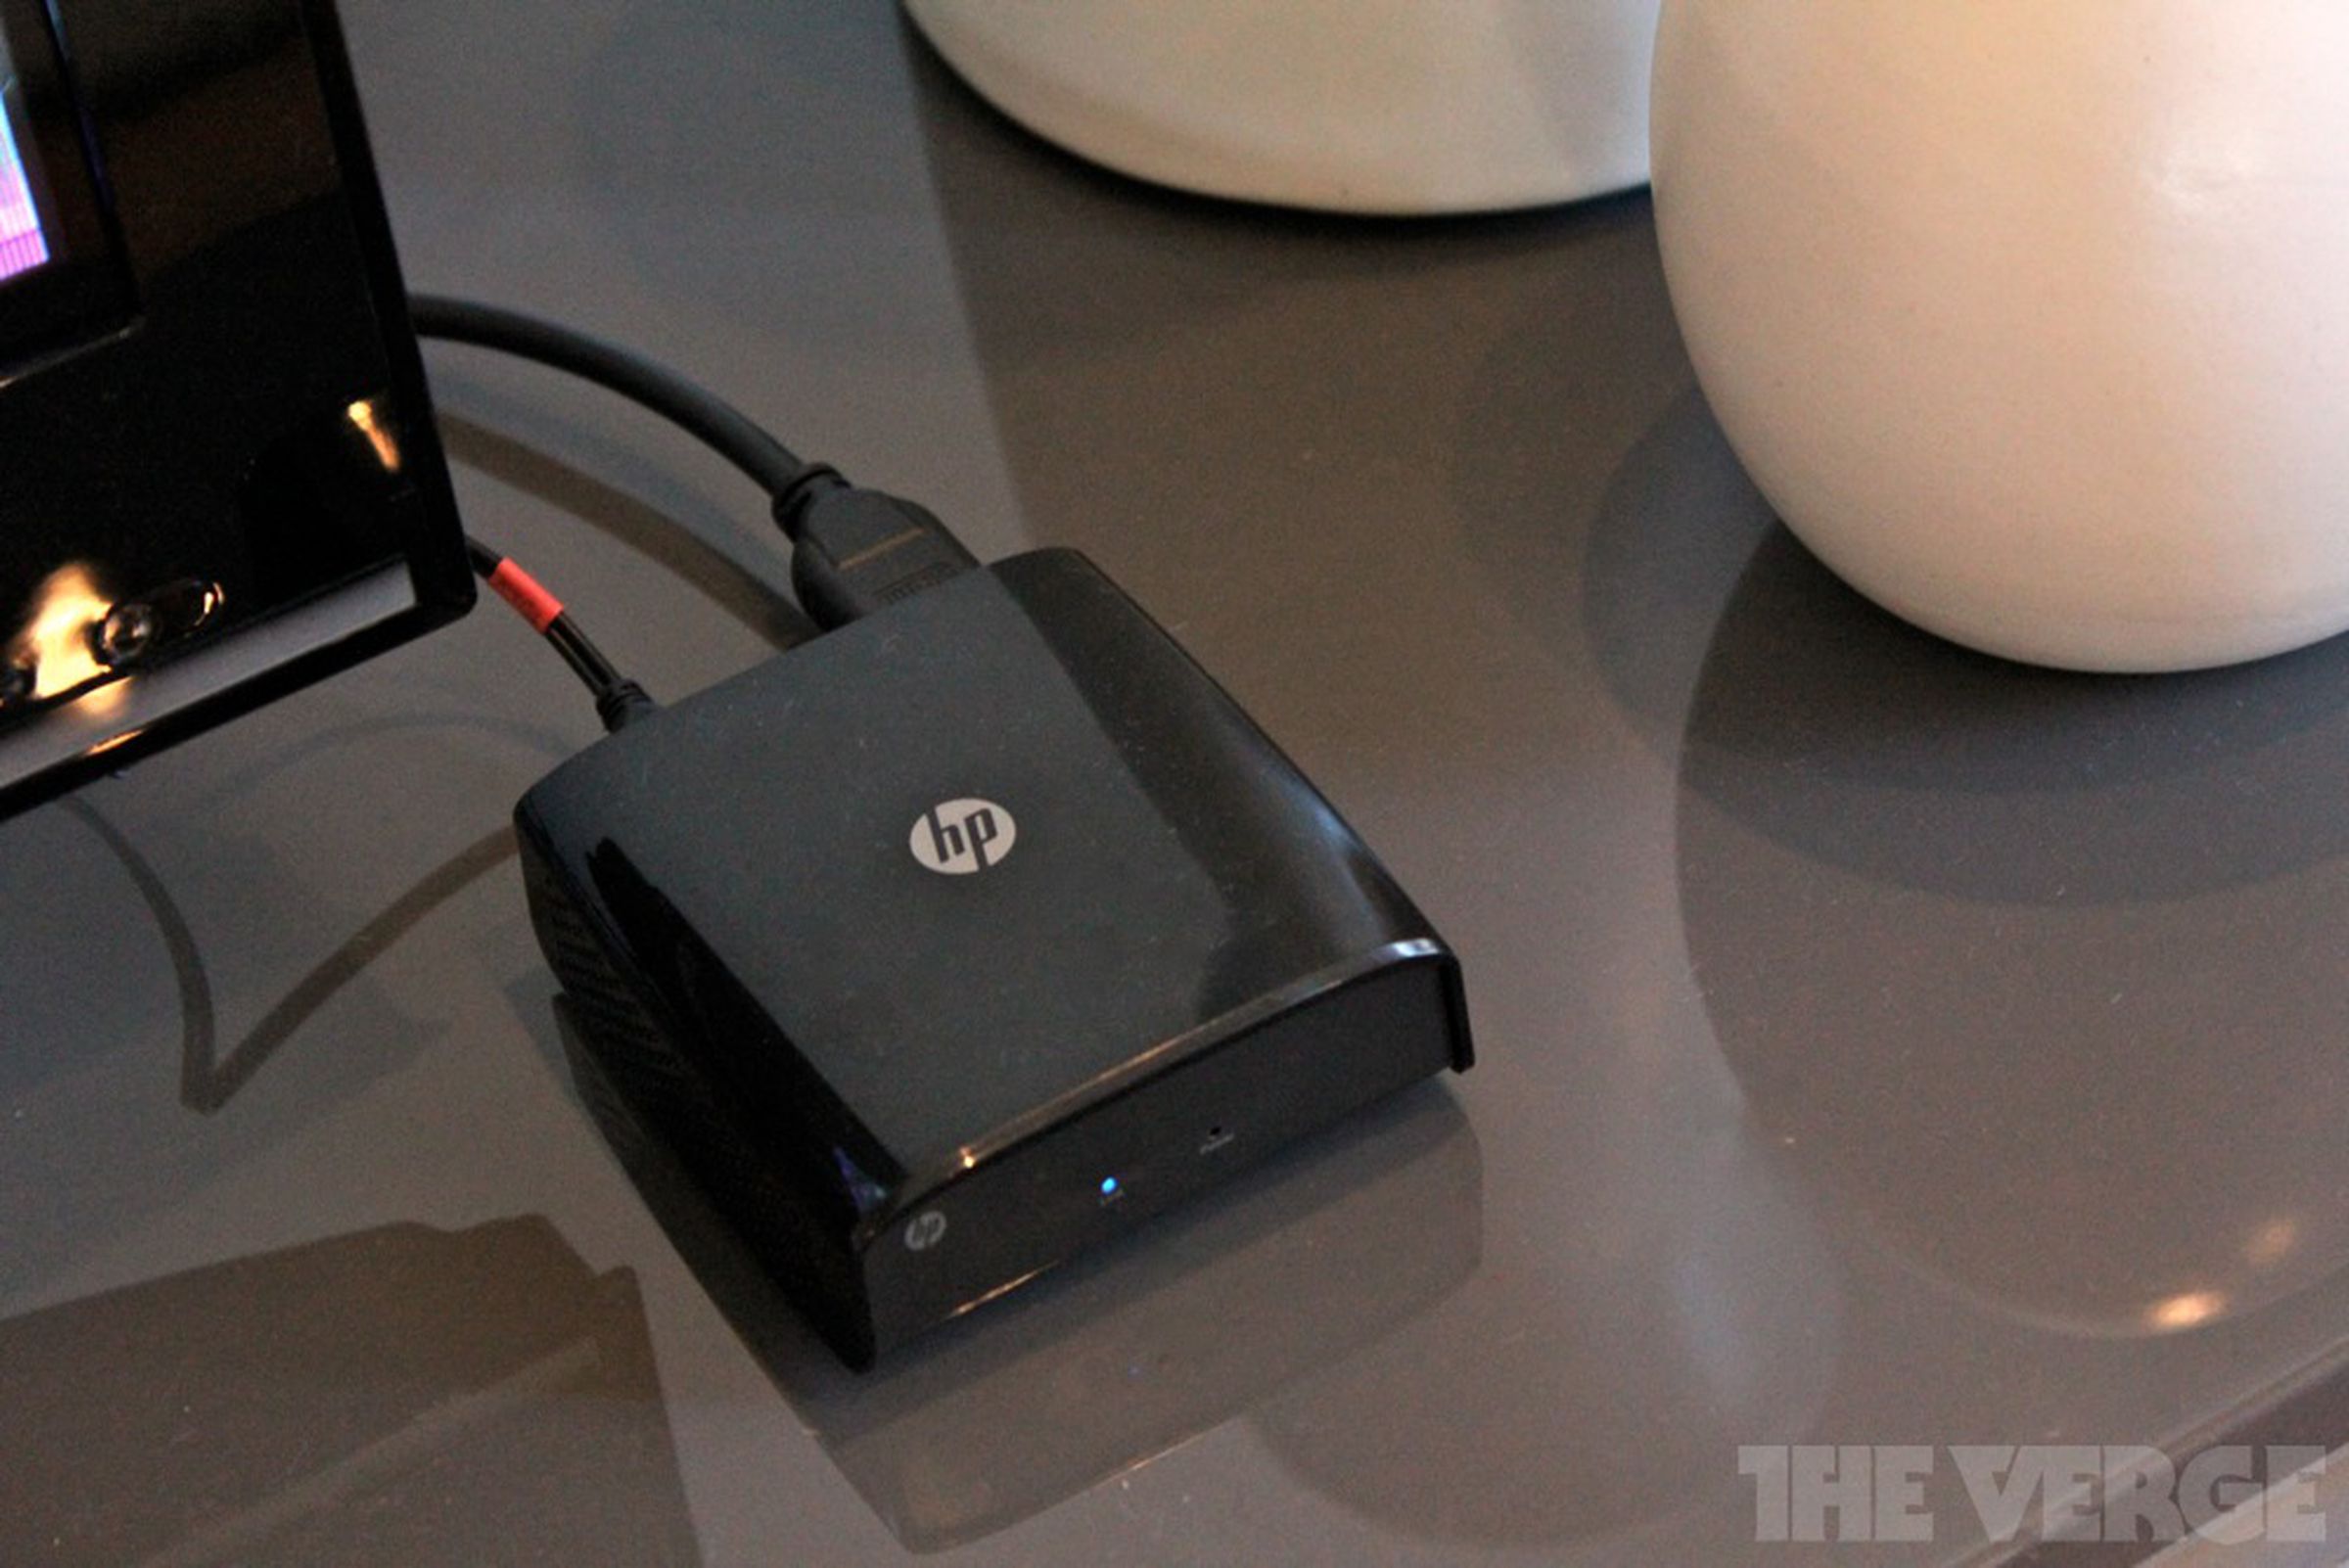 HP Wireless TV Connect hands-on and press photos 